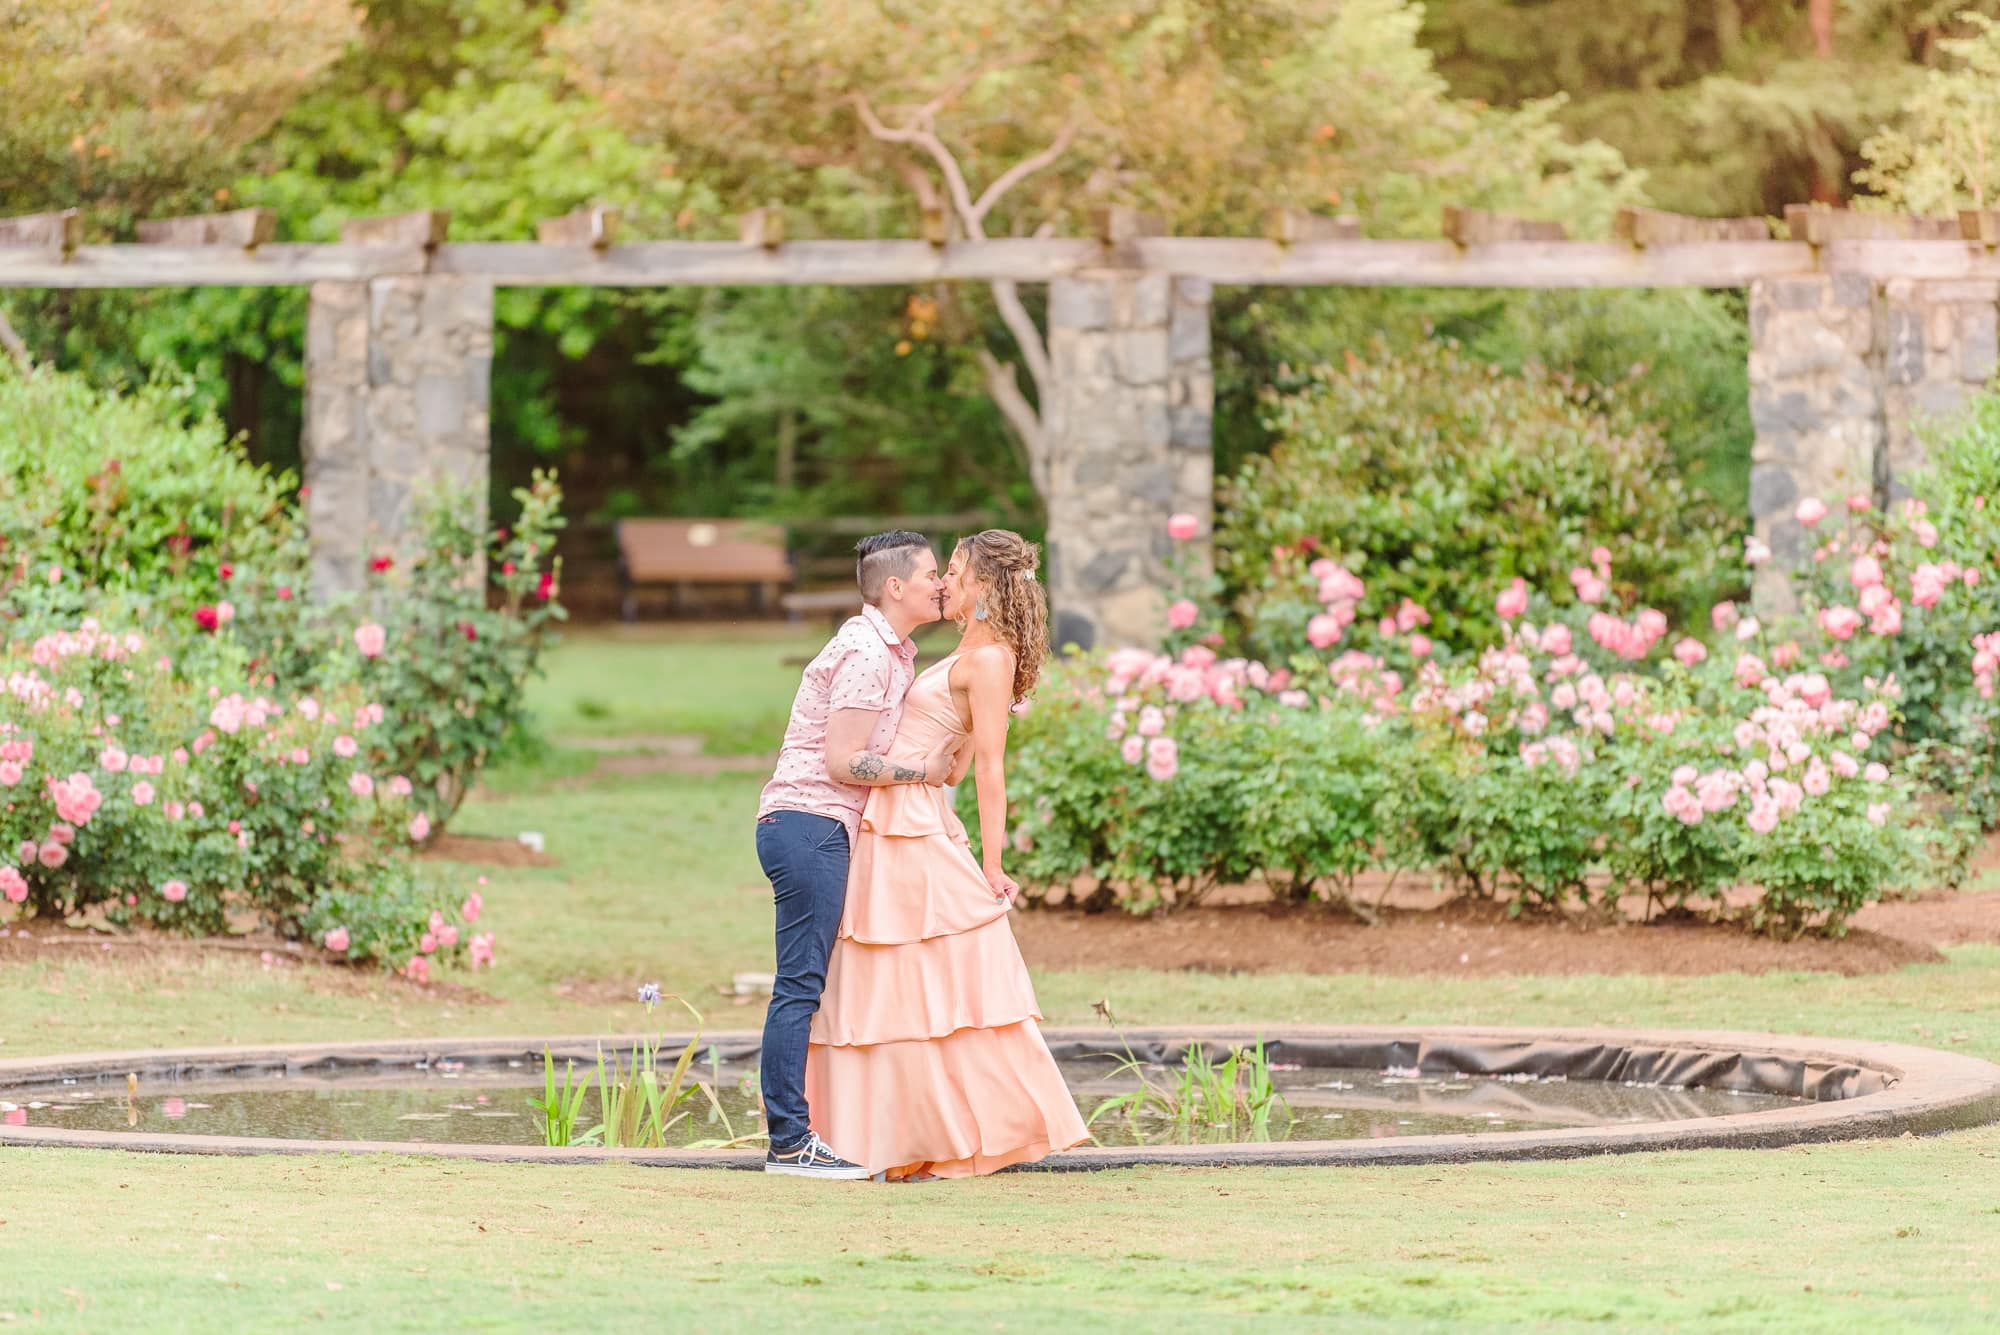 Two girls dance in the middle of the garden for their spring engagement photos.